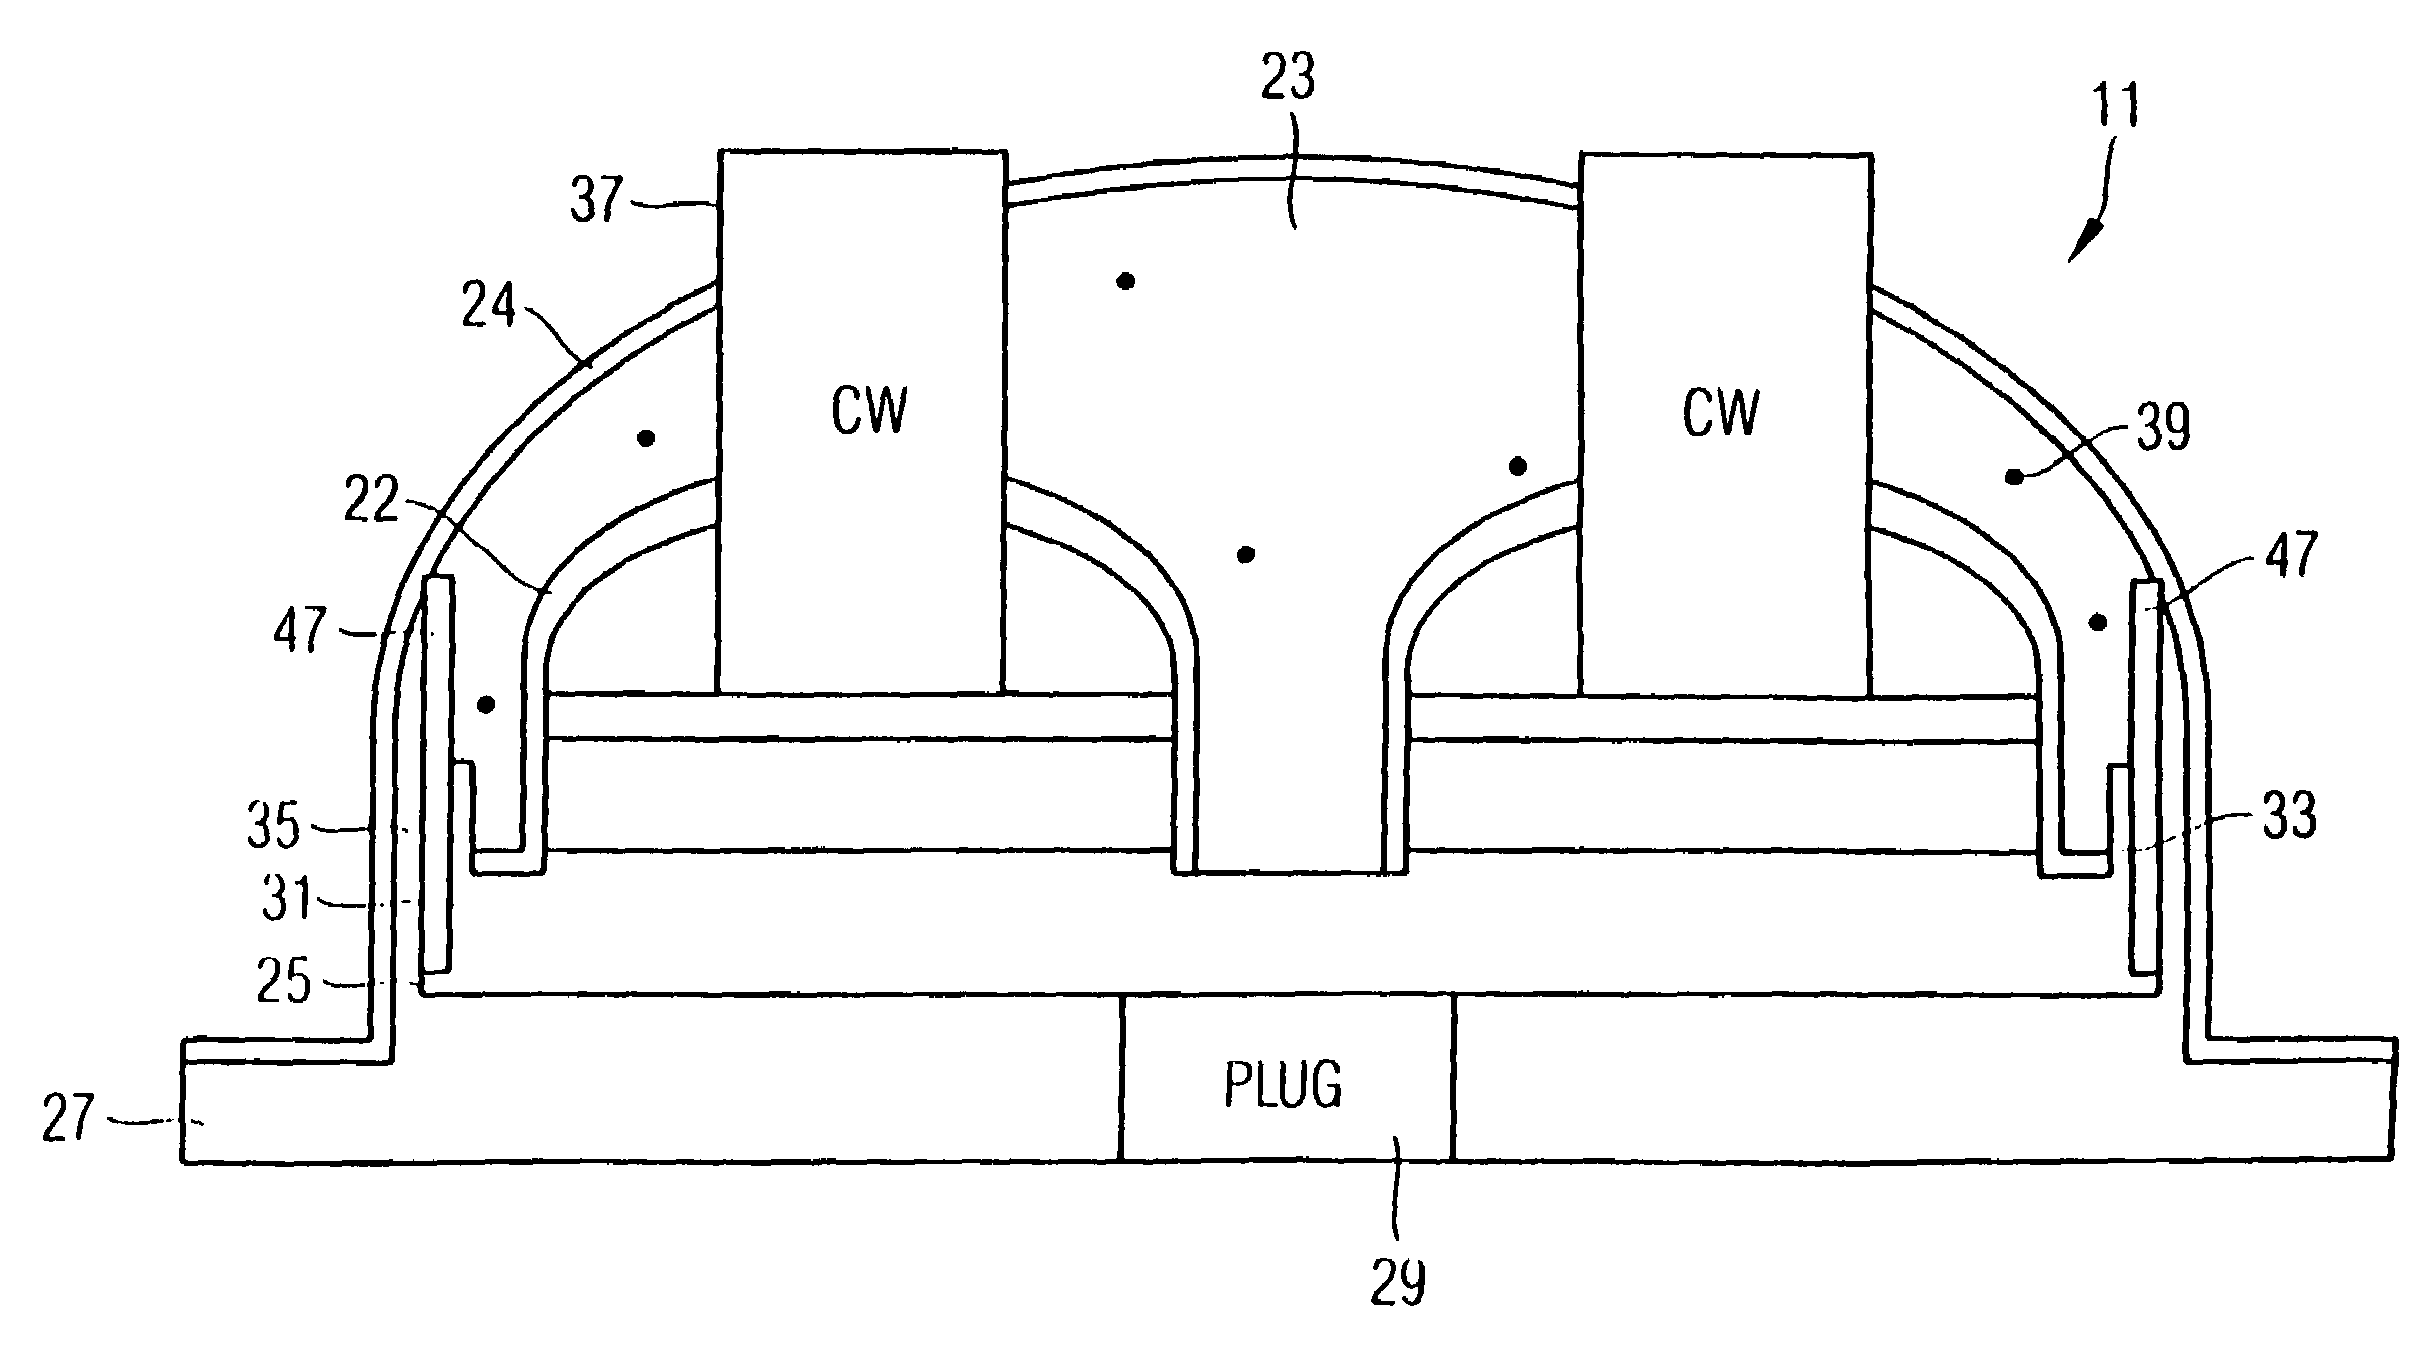 Sidewall structure and method of fabrication for reducing oxygen diffusion to contact plugs during CW hole reactive ion etch processing